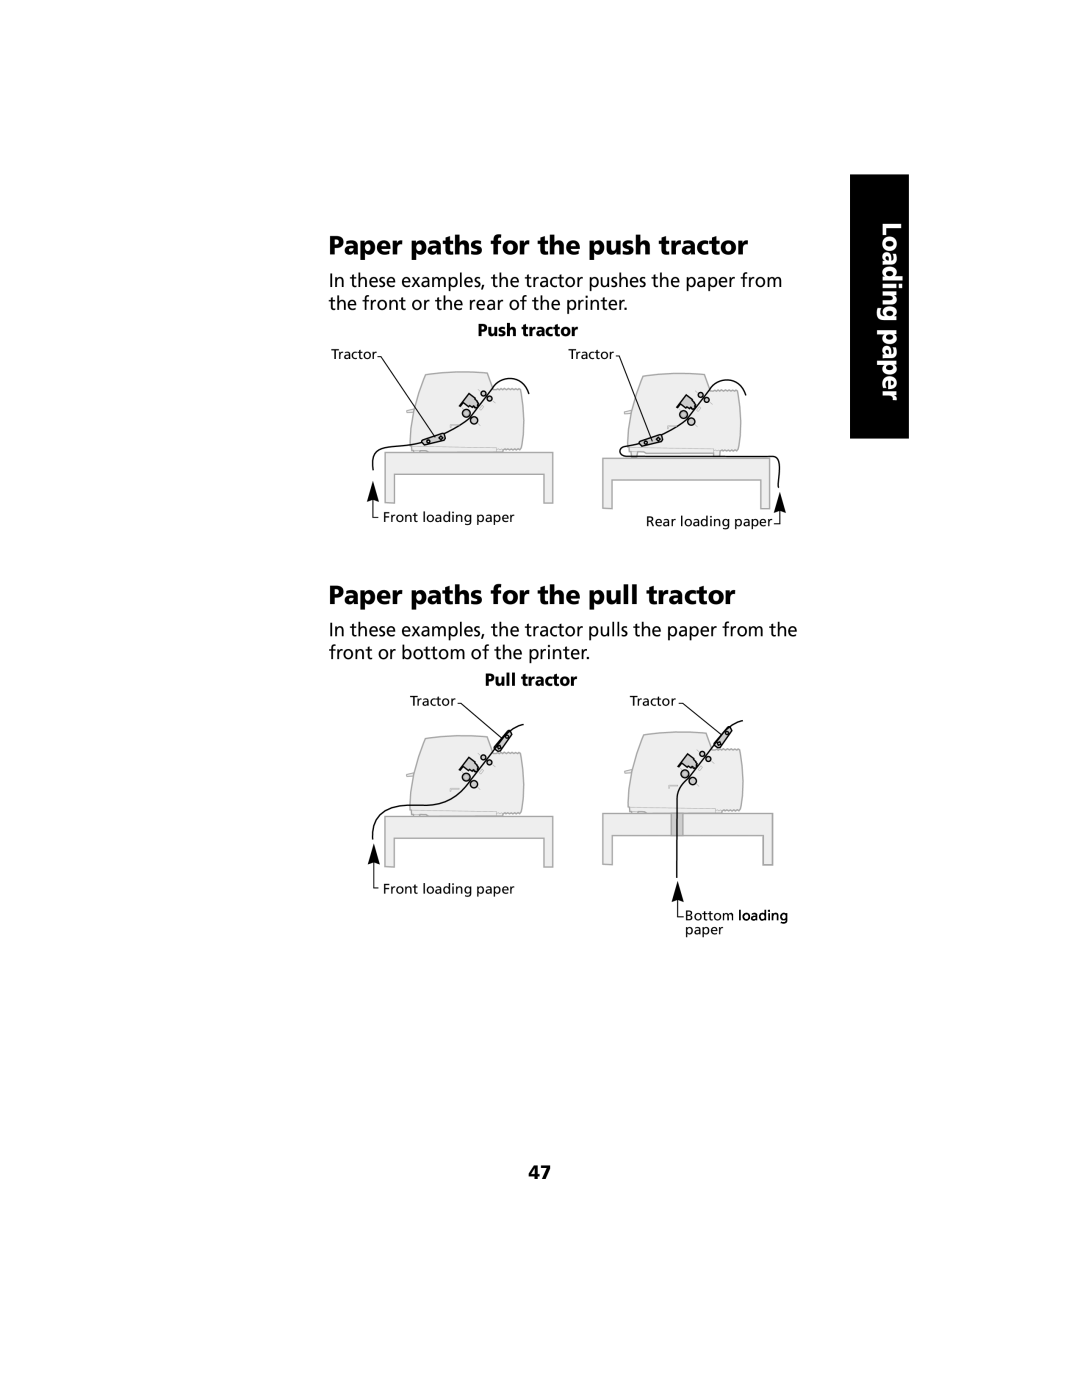 Lexmark 2480 Paper paths for the push tractor, Paper paths for the pull tractor, Loading paper, Push tractor, Pull tractor 